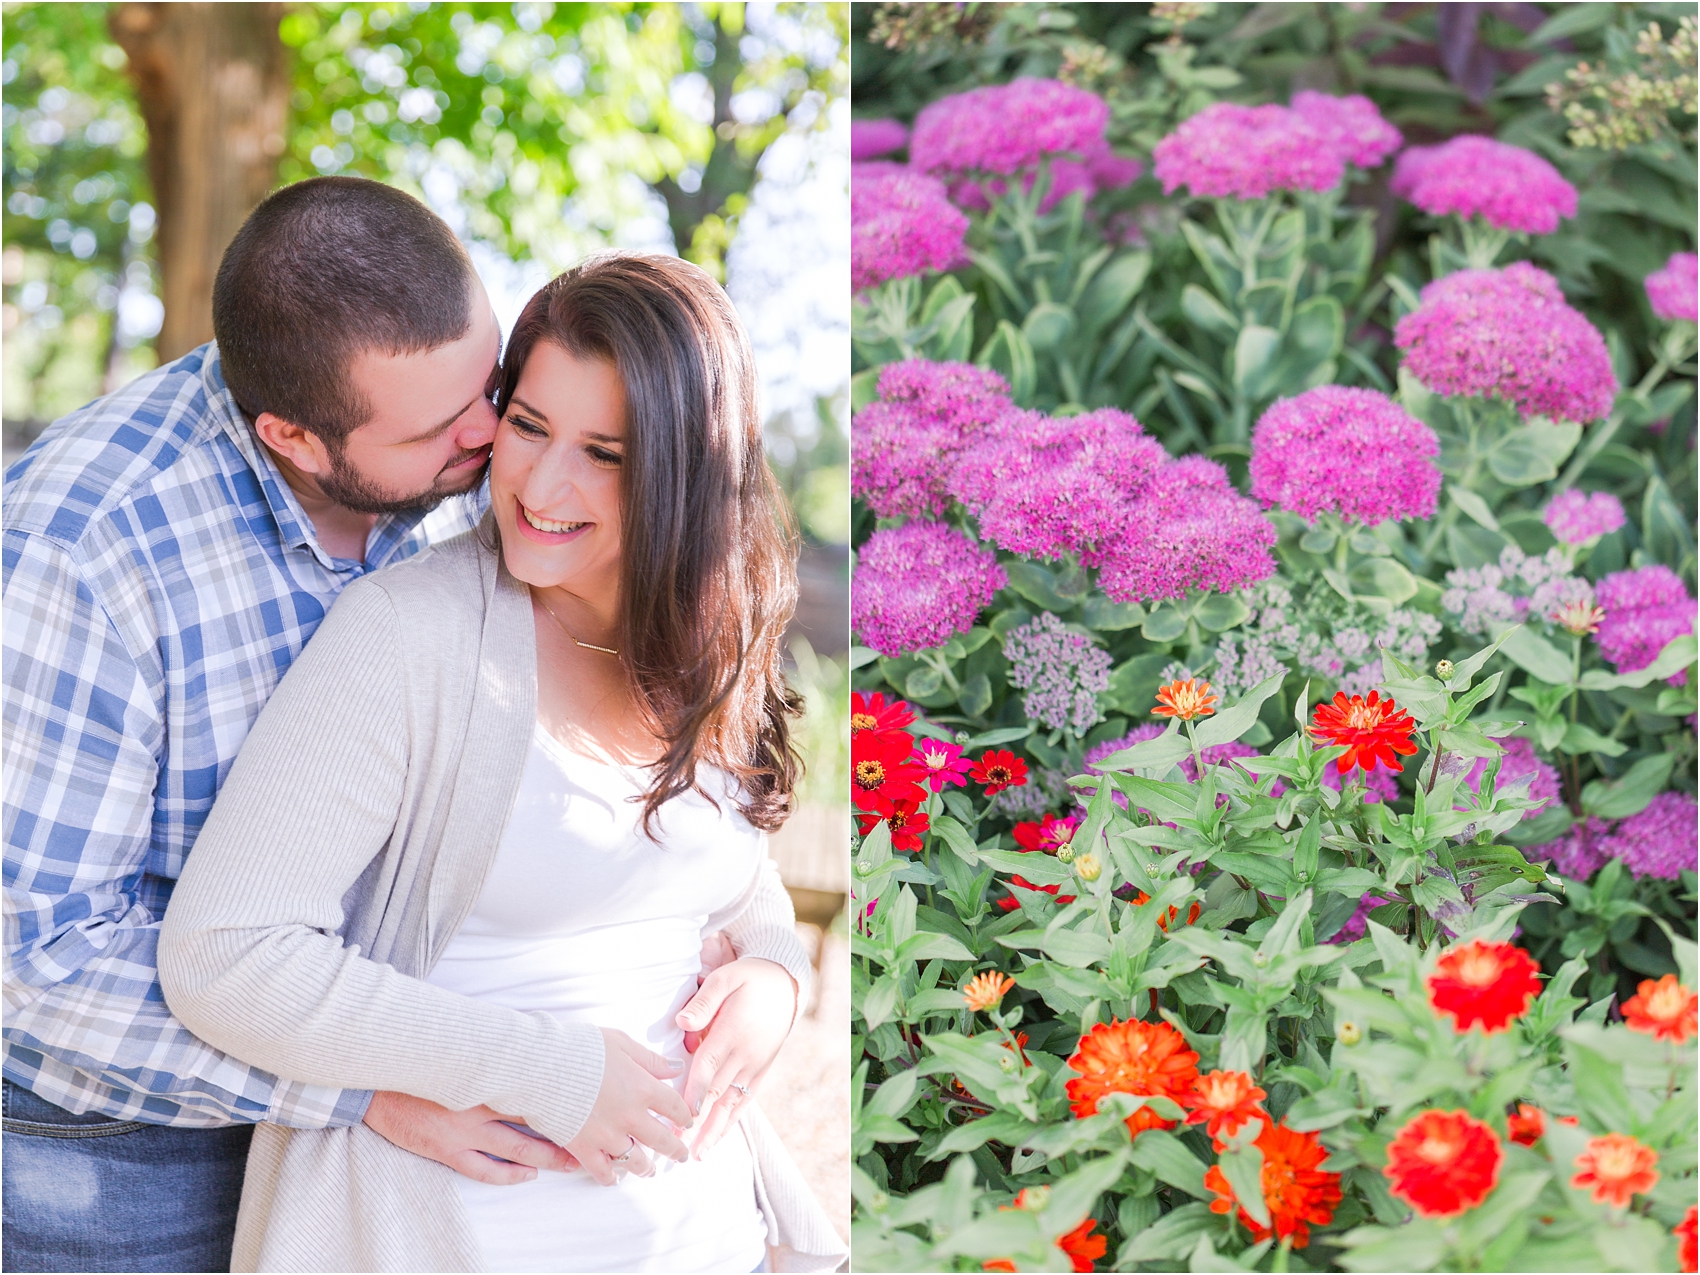 candid-romantic-summer-engagement-photos-at-hidden-lake-gardens-and-black-fire-winery-in-tipton-mi-by-courtney-carolyn-photography_0030.jpg